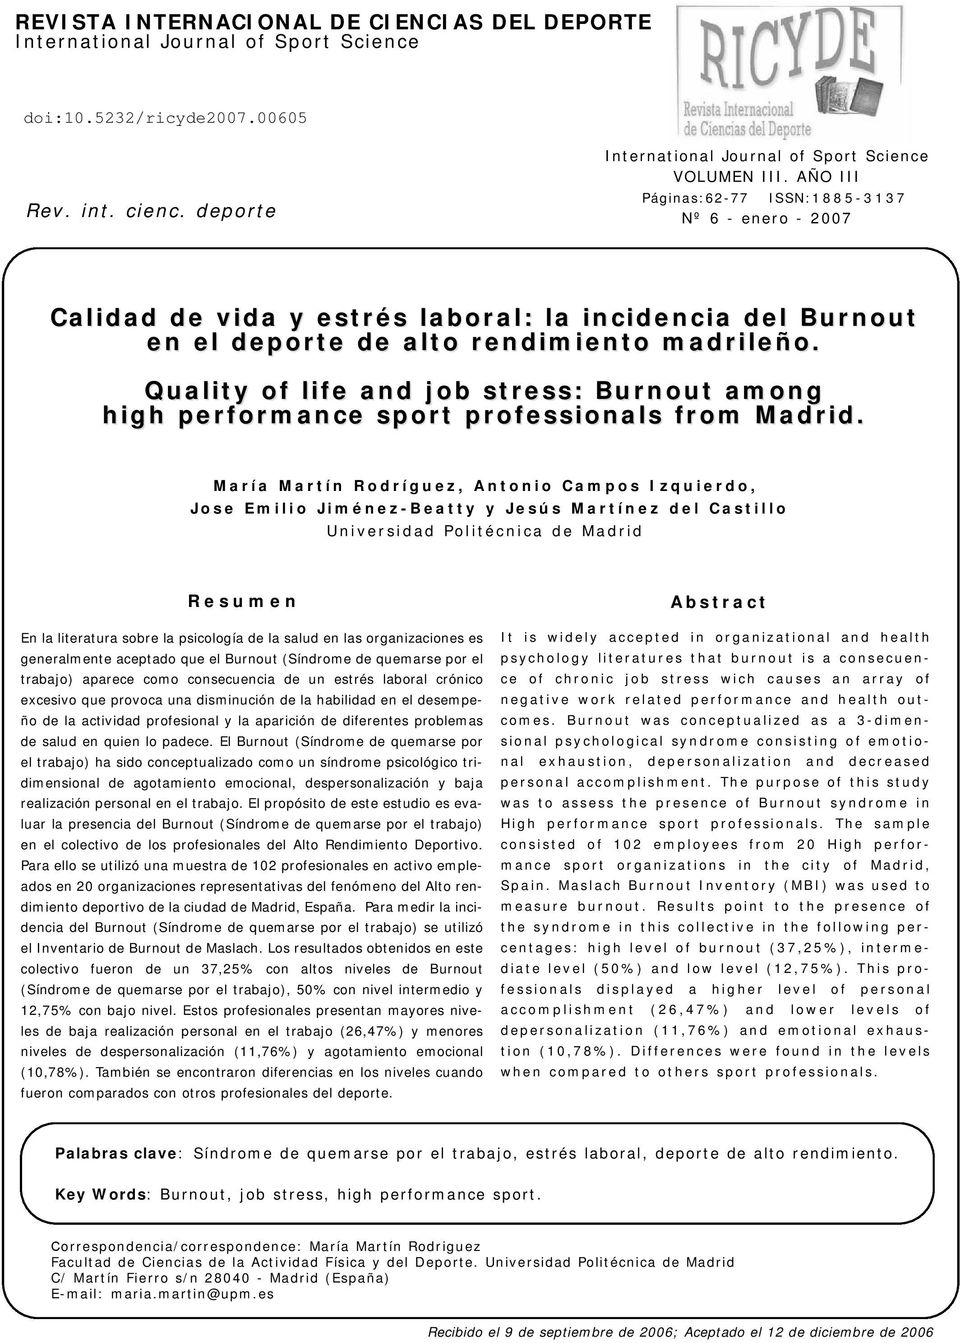 Quality of life and job stress: Burnout among high performance sport professionals from Madrid.